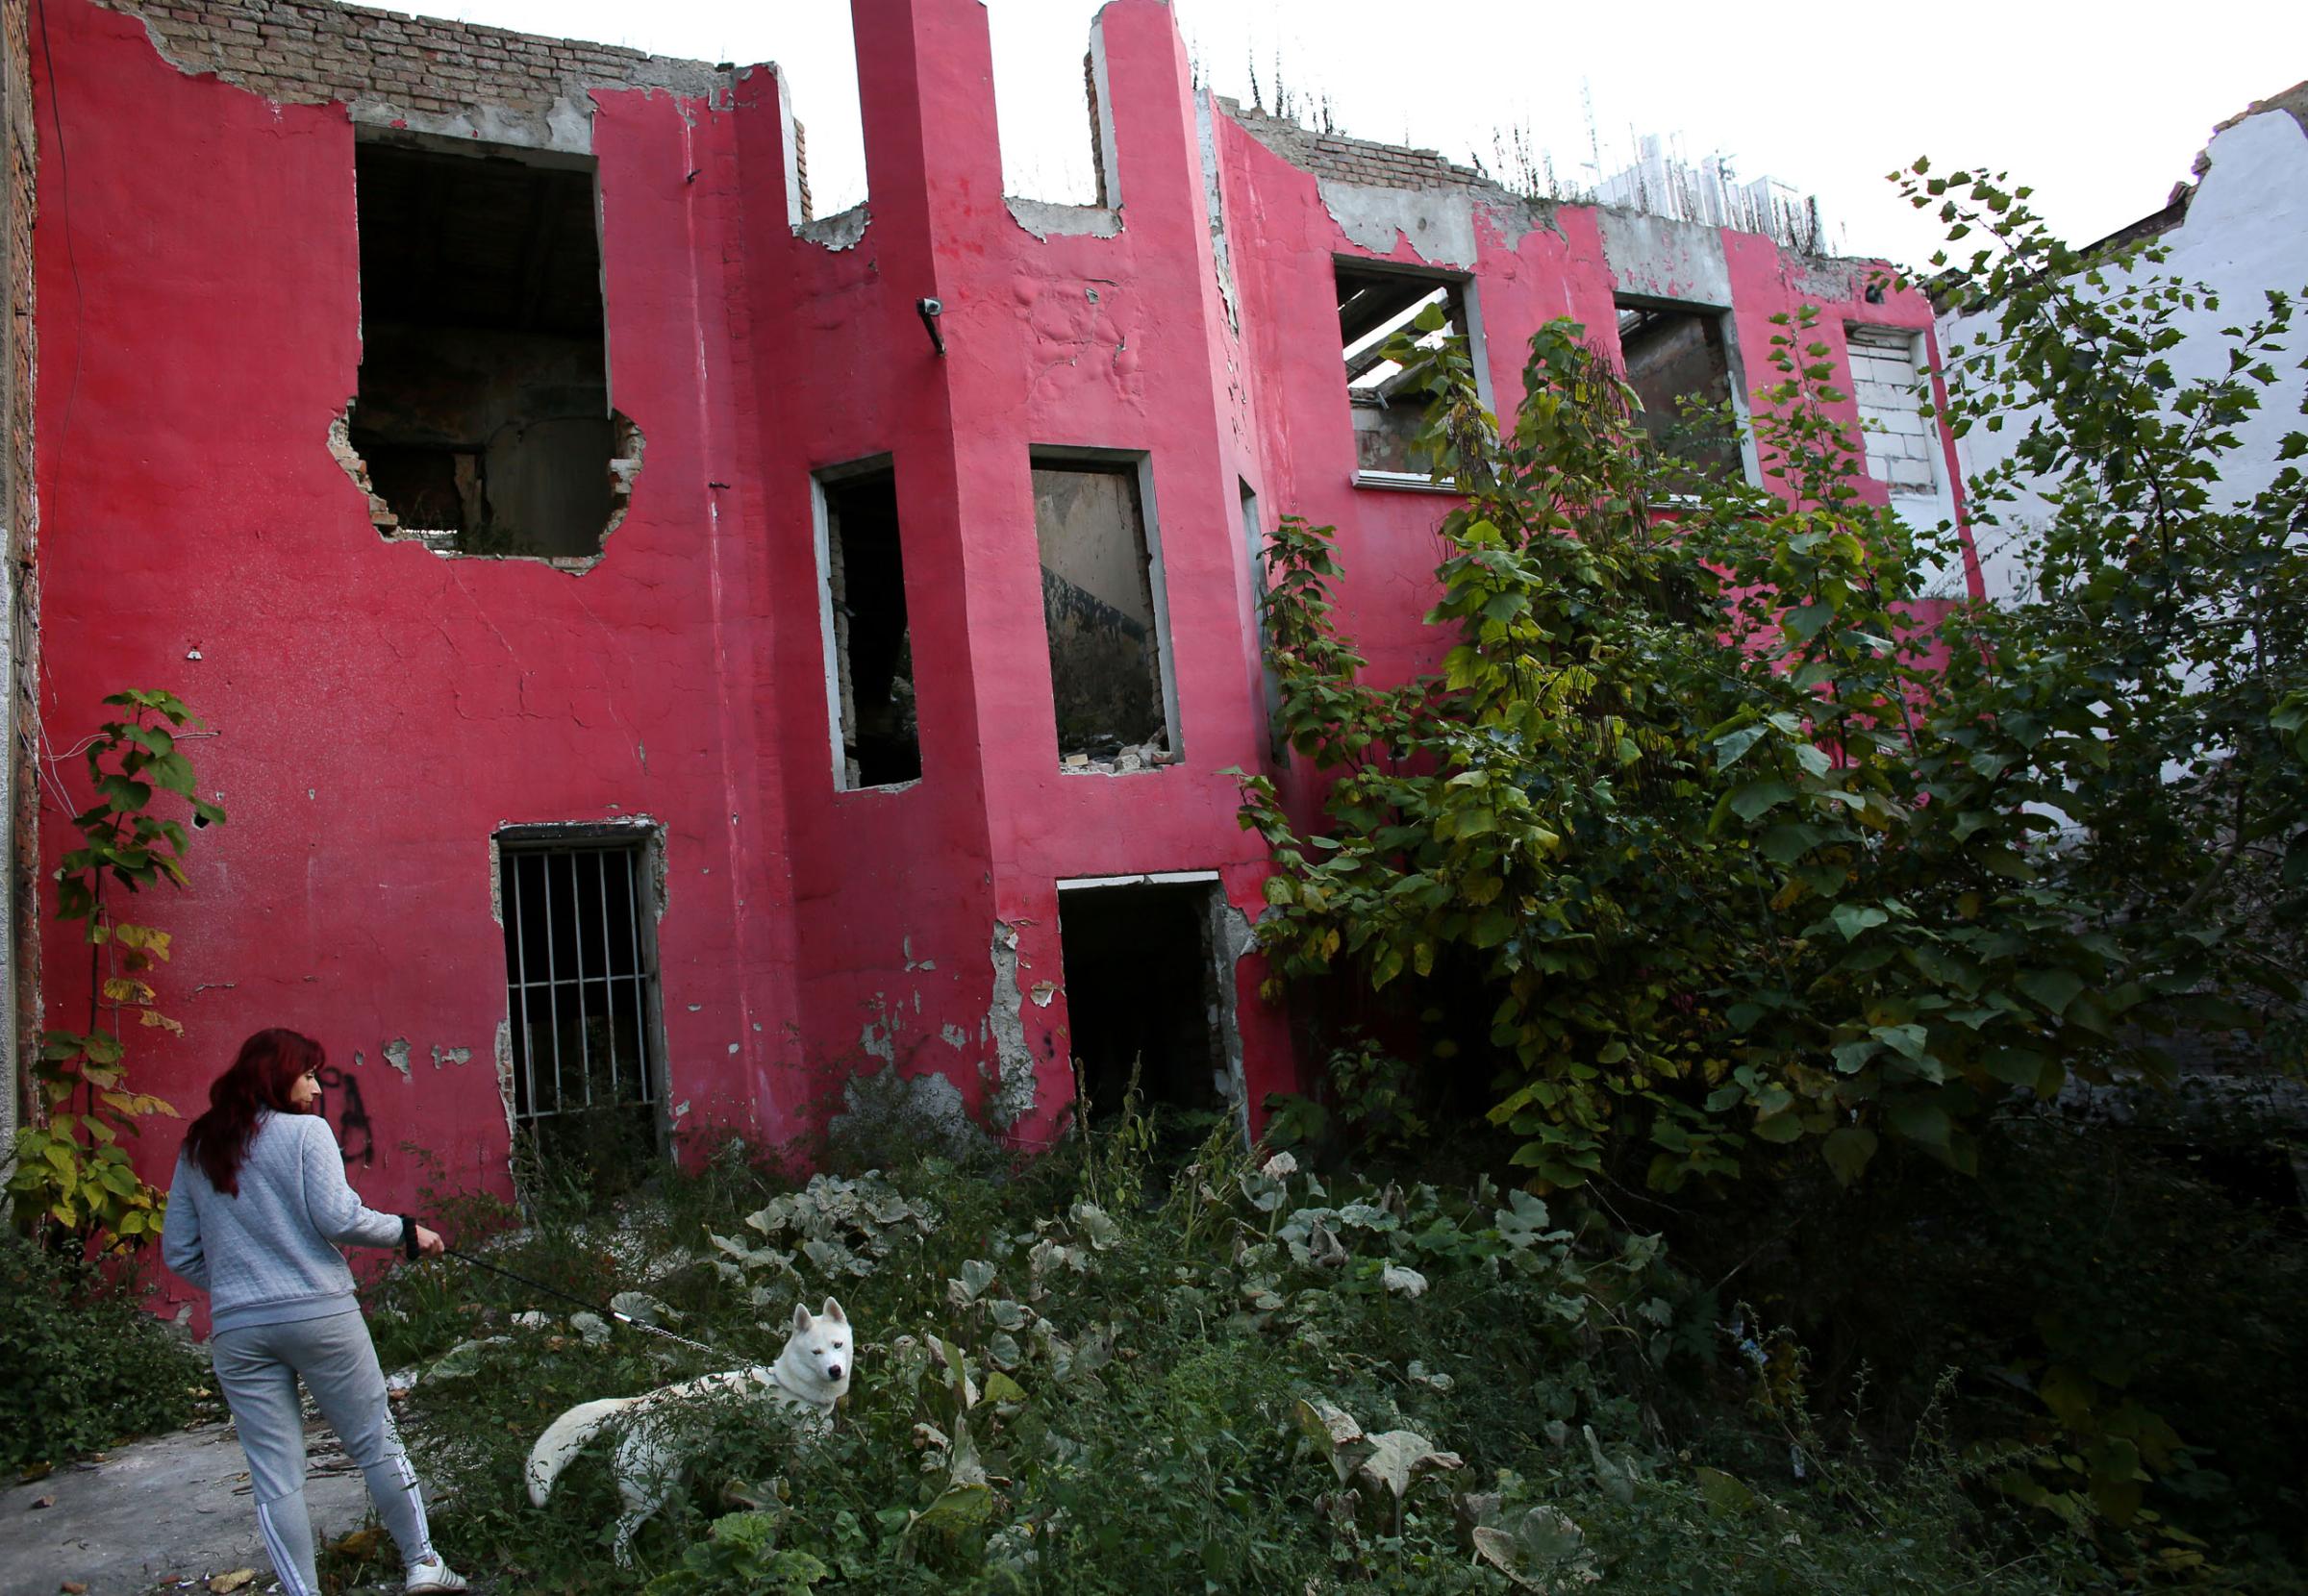 A woman walks her dog by an abandoned building in Vidin, a town of rapidly declining population in Western Bulgaria, on October 22nd, 2014. Bulgaria has the most extreme population decline in the world ó much due to post-1989 emigration, high death rates and low birth rates. There are so few people of child-bearing age in the nation that population statistics project a 30-percent decrease by 2060, from 7.2 million to just over 5 million. In other words,†Bulgariaís population declines by 164 people a day, or 60,000 people a year ó 60 percent of them aged over 65.This photo is from a project that aims to gauge the state and effect of democracy in the former Soviet satellite nation Bulgaria, two and a half decades after the fall of the Berlin Wall. The story of democracy in Bulgaria at age 25 is a cautionary tale about transplanting one-size-fits-all Western values to a nation still undergoing social and economic upheaval. Bulgaria is still one of the poorest, most corrupt nations in the European Union, its post-1989 hopes wilted by political instability, high crime rates and skyrocketing inflation. While Bulgarians can now freely vote and protest without much threat to their freedom, their new oppressor is corruption - which is at a 15 year high, across political and civil sectors alike. The ennui is so casually etched on the passerby's face that it becomes routine - one that fits in sadly well against a startling backdrop of rotting architecture, joblessness, and a vast population decline. Despite what democracy has changed in Bulgaria, the daily struggles of its populace remain largely untouched, trapped in a post-communist time capsule.This project was supported by a grant from The Pulitzer Center on Crisis Reporting. Photo by: Yana PaskovaCopyright © Yana Paskova 2014